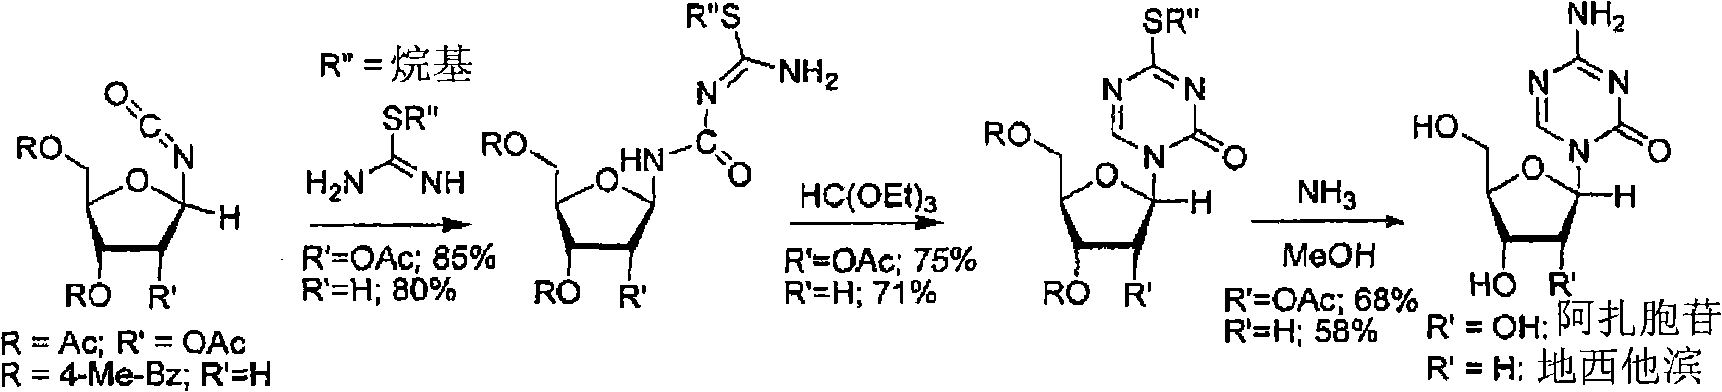 Process for making 5-azacytosine nucleosides and their derivatives